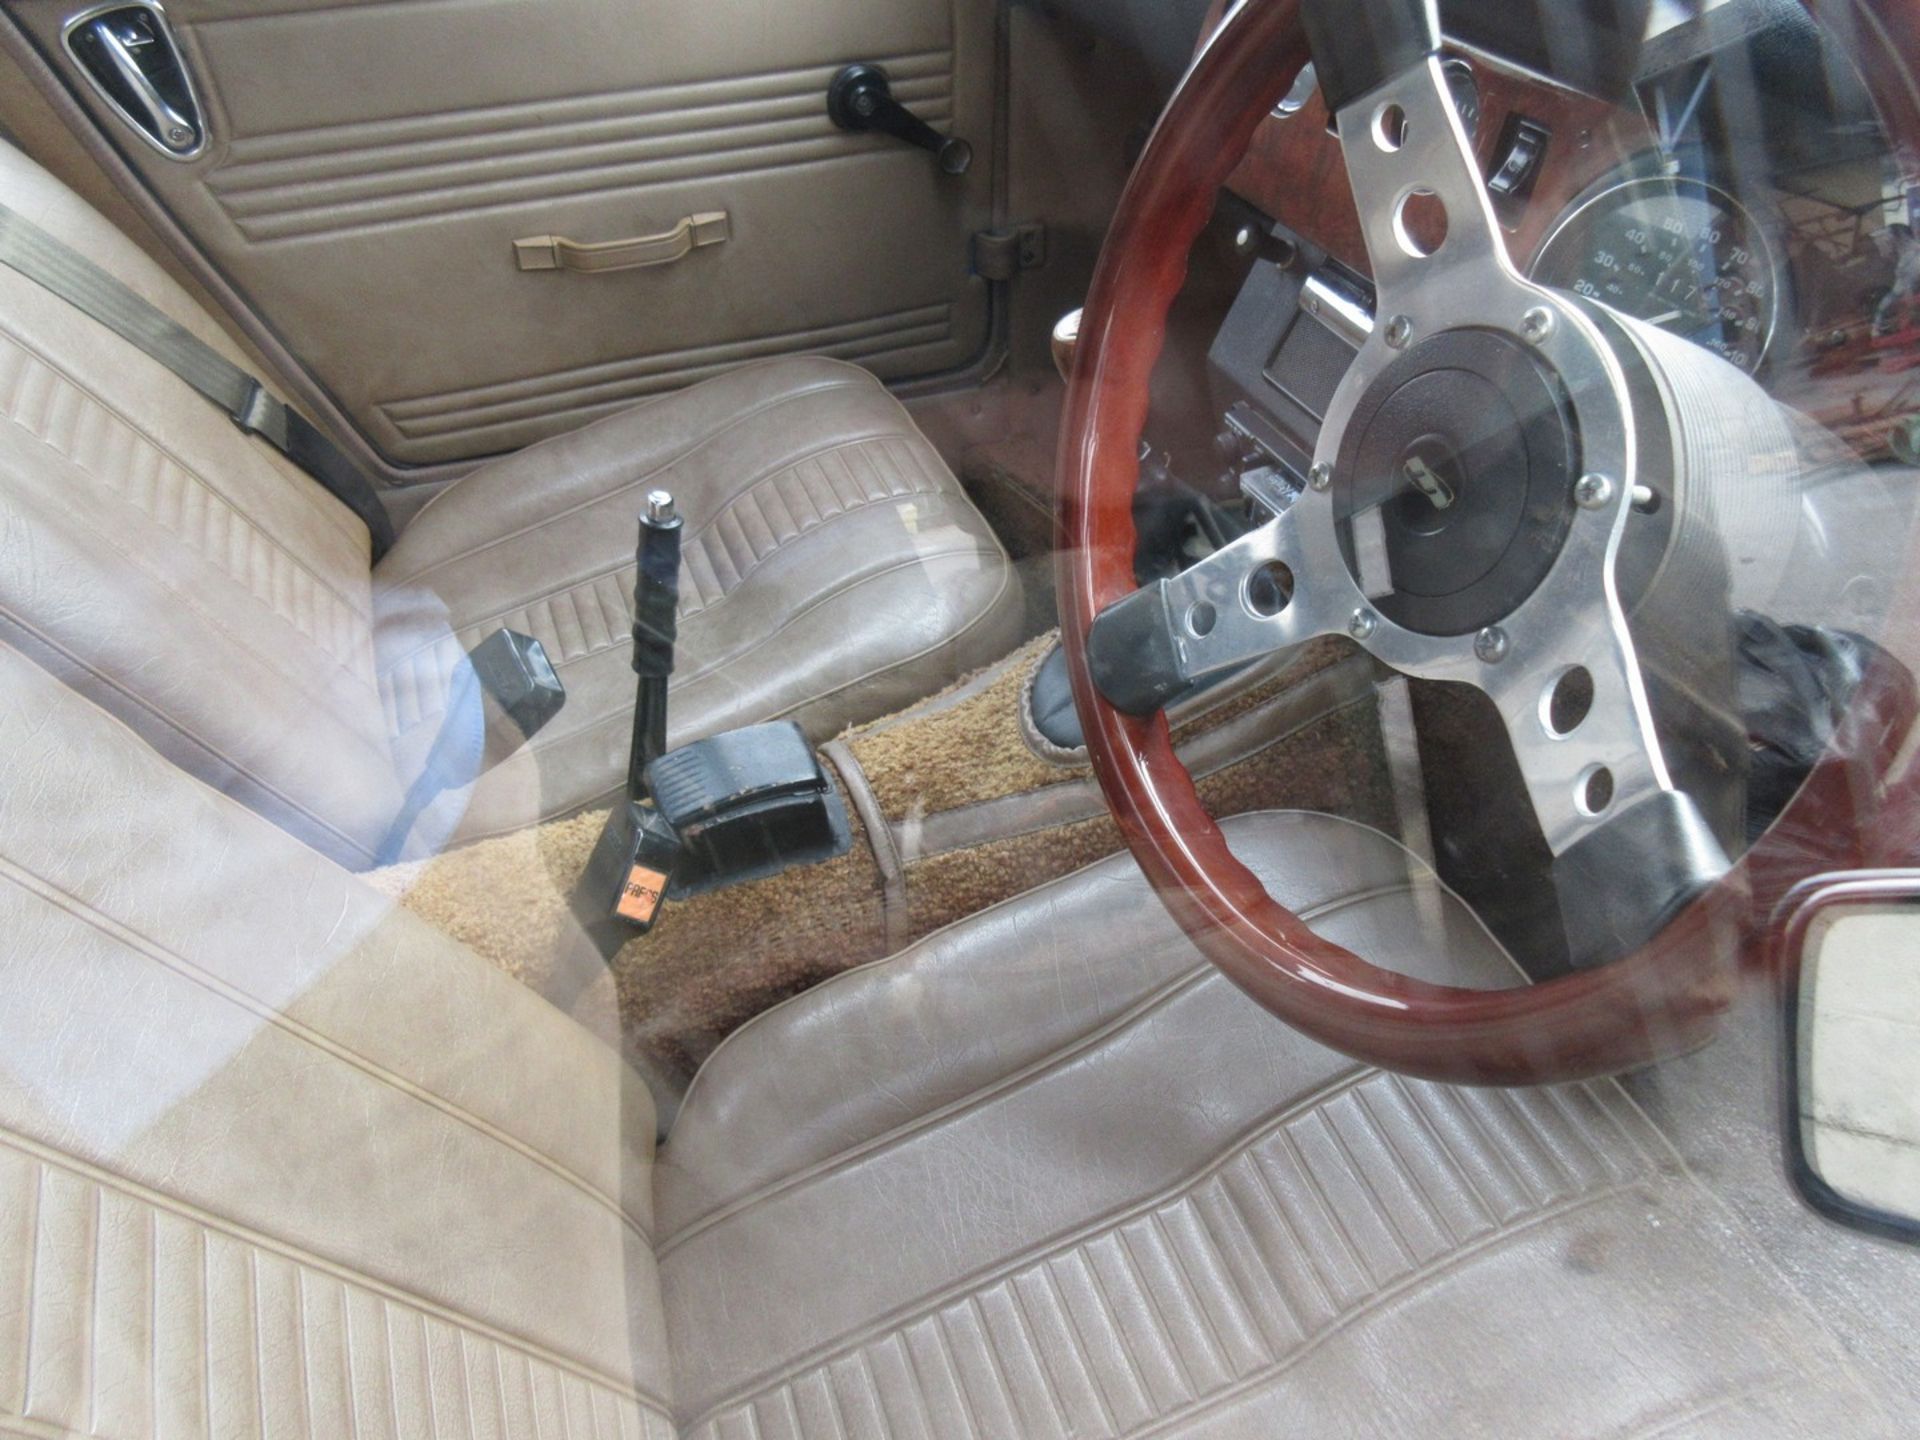 1979 MG Midget 1500 Car, 55000 miles from new, MOT until April 2020, walnut dash and steering wheel - Image 3 of 5